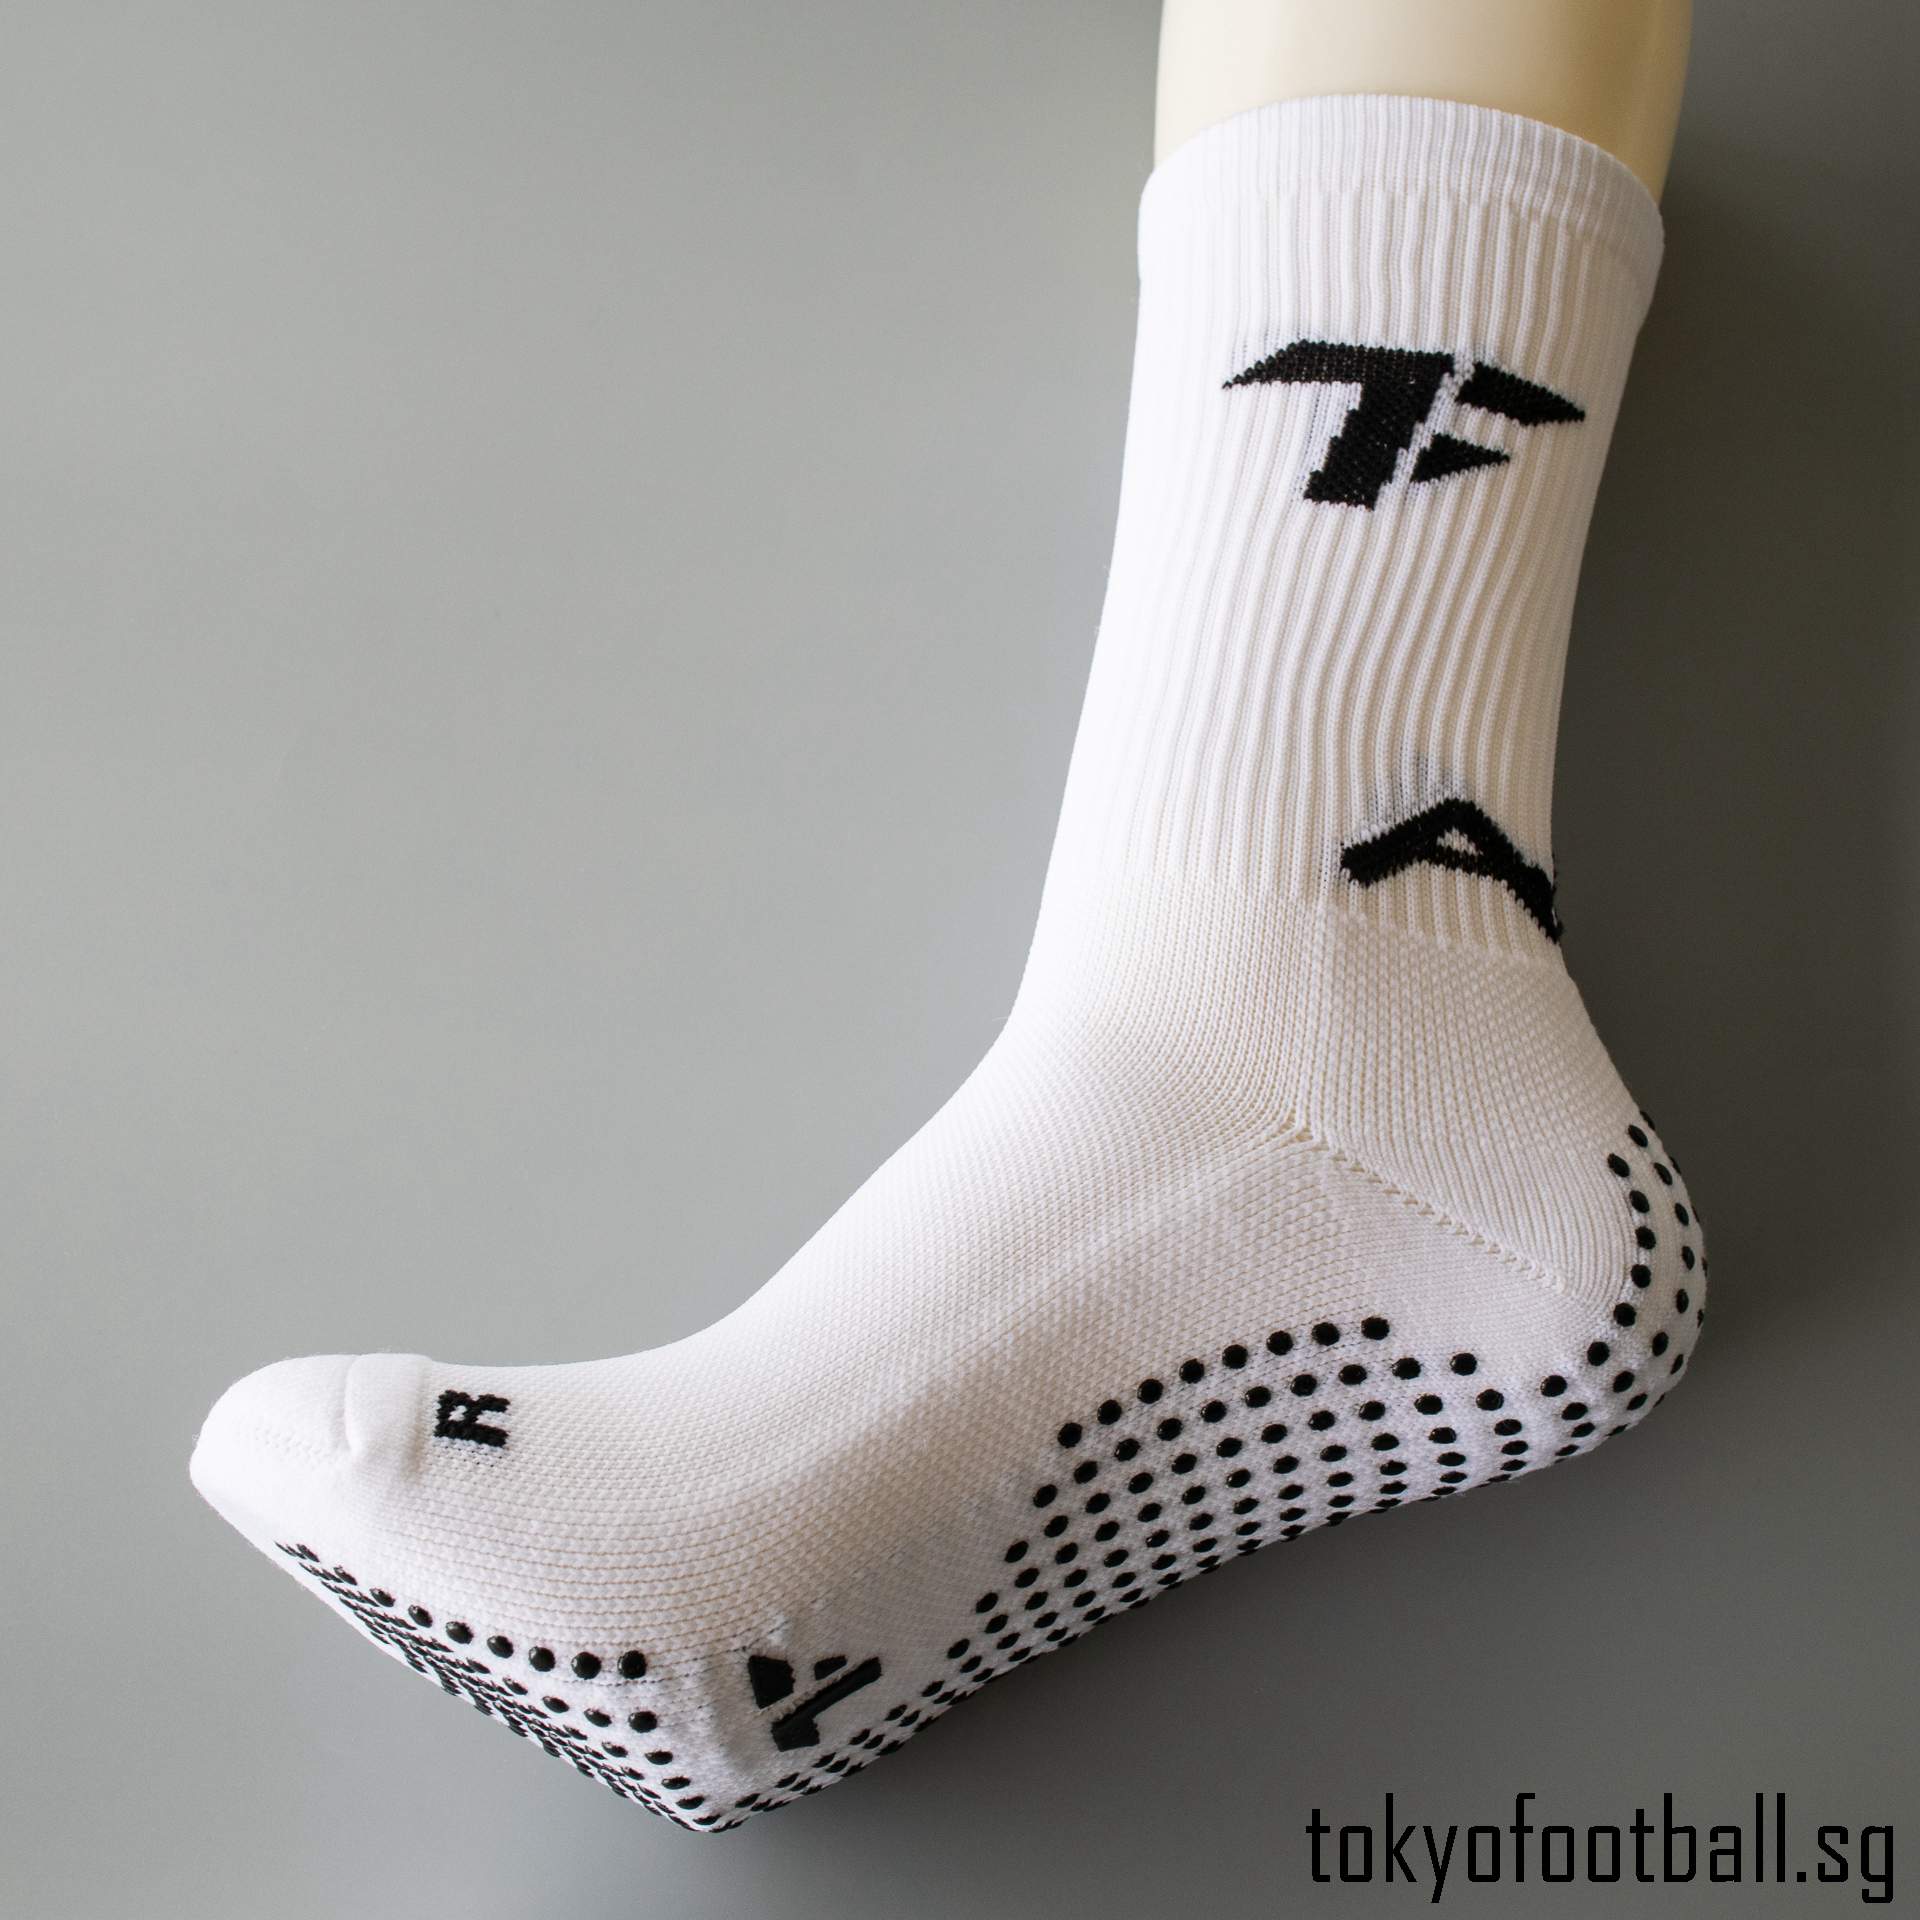 Basketball Tennis and Rugby TapeDesign Grip Socks Suitable for Football 